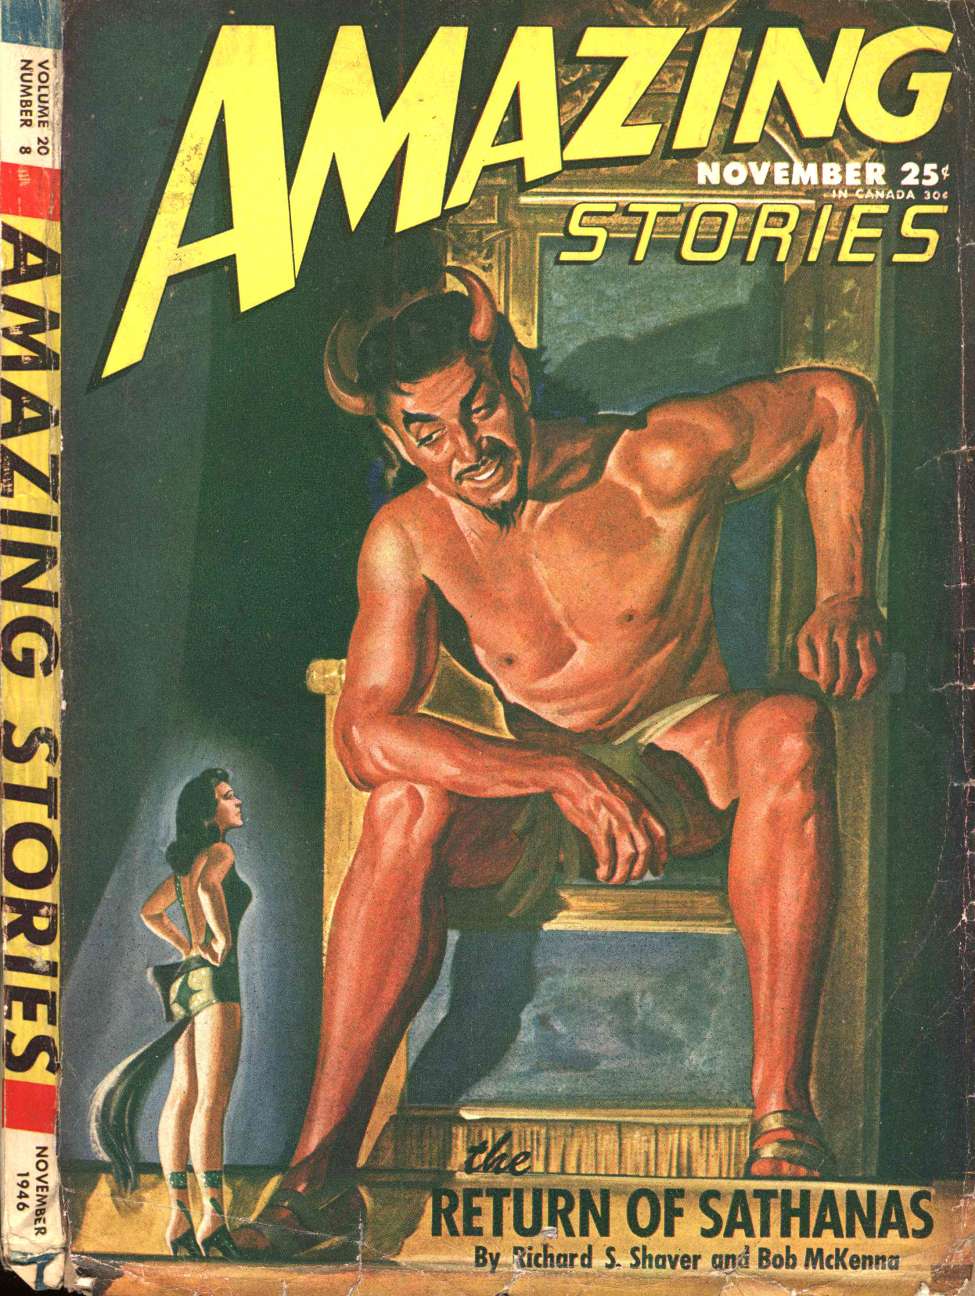 Book Cover For Amazing Stories v20 8 - The Return of Sathanas - Richard S. Shaver